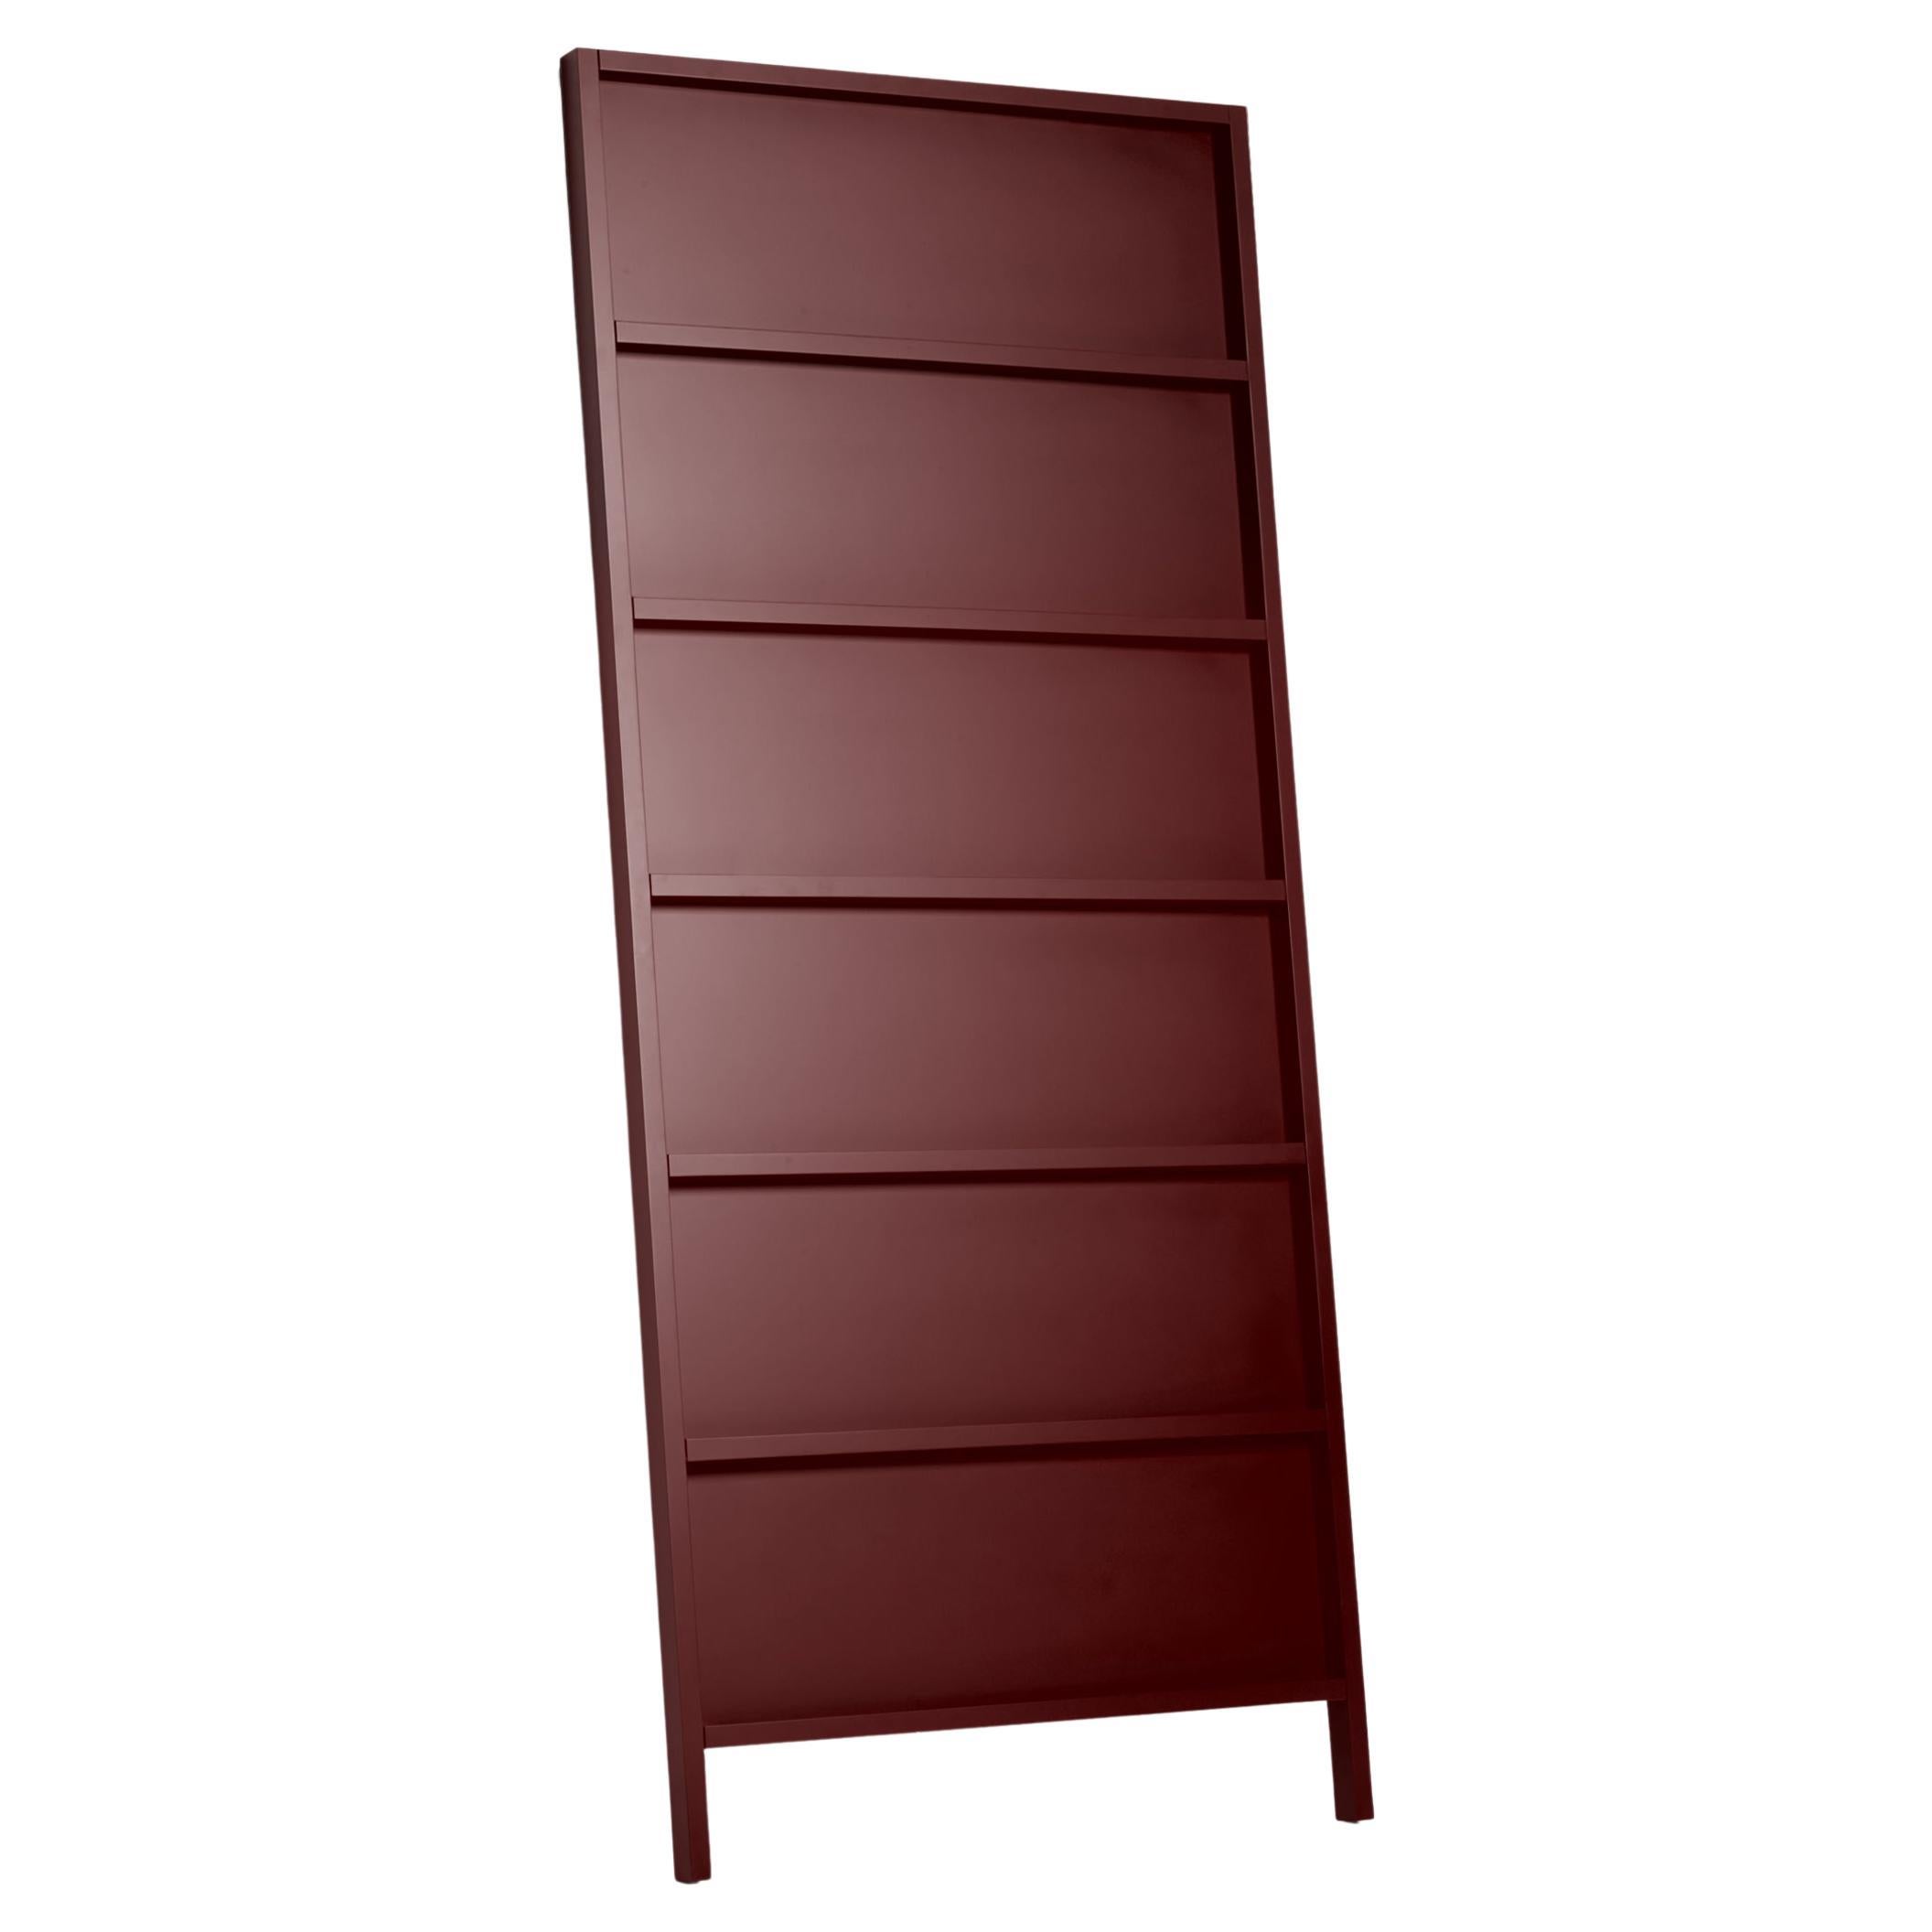 Moooi Oblique Big Cupboard / Wall Shelf in Mahogany Brown Lacquered Beech For Sale